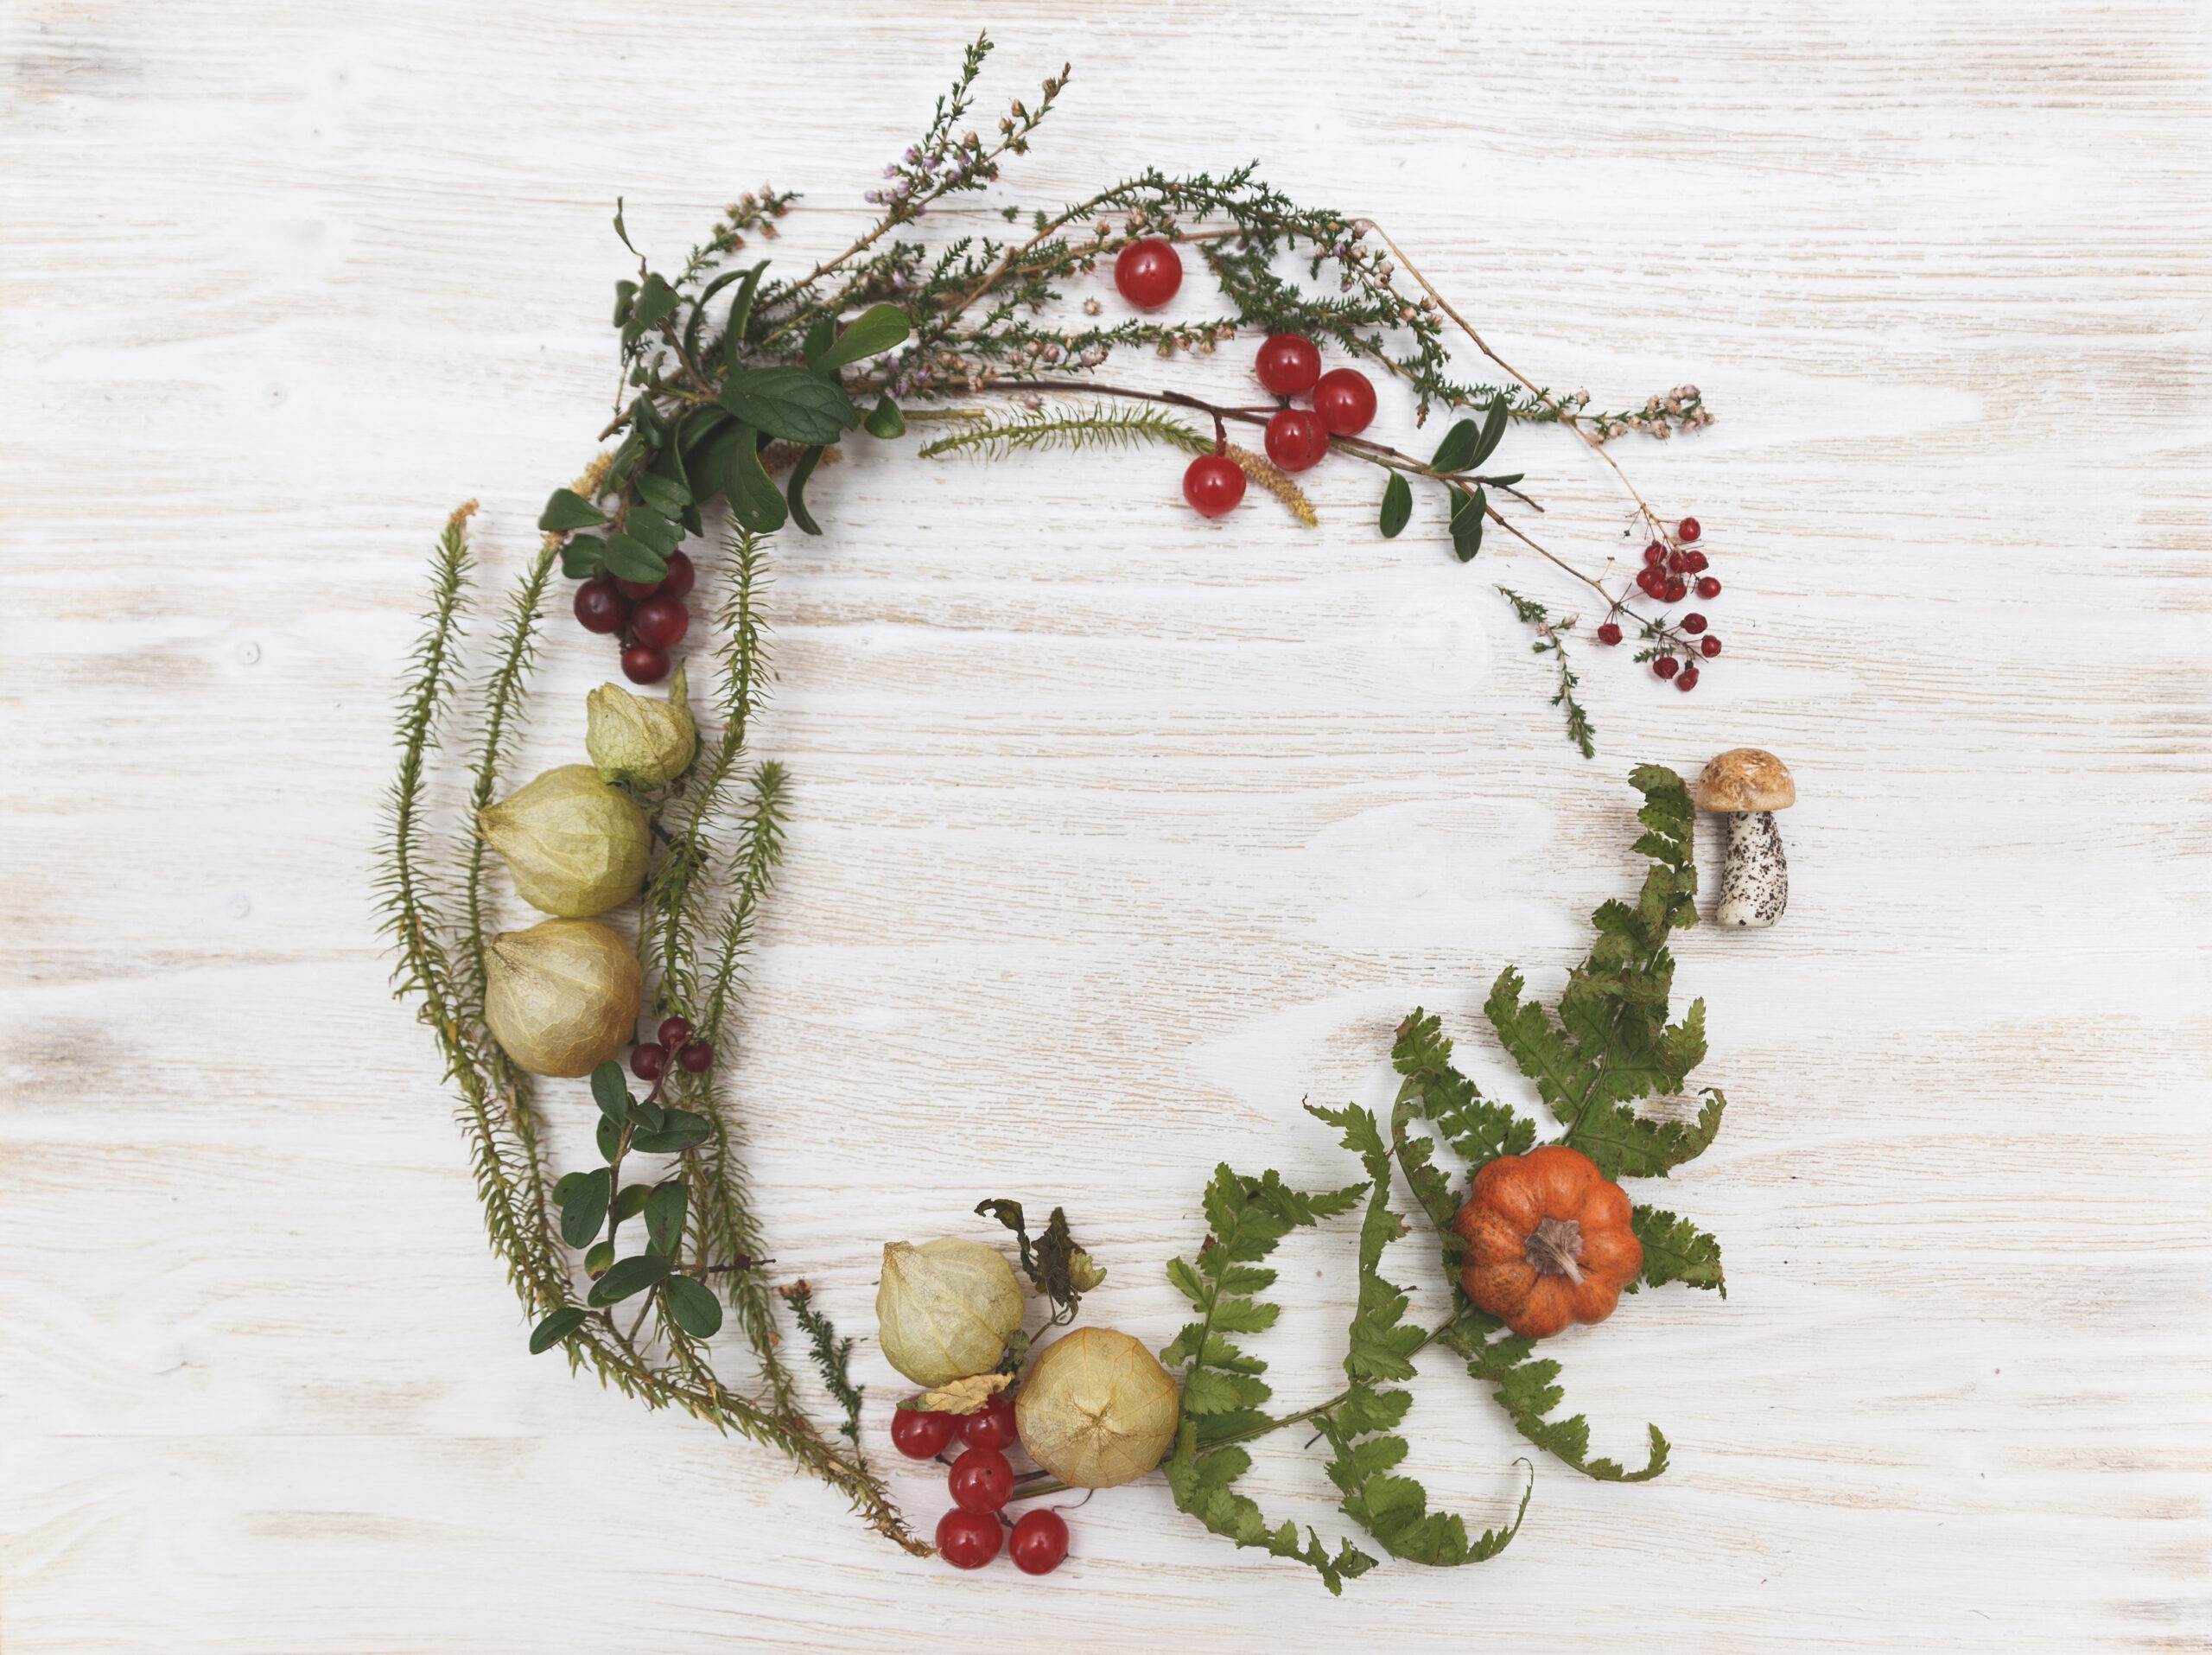 Fall wreath layout with ferns and pumpkins